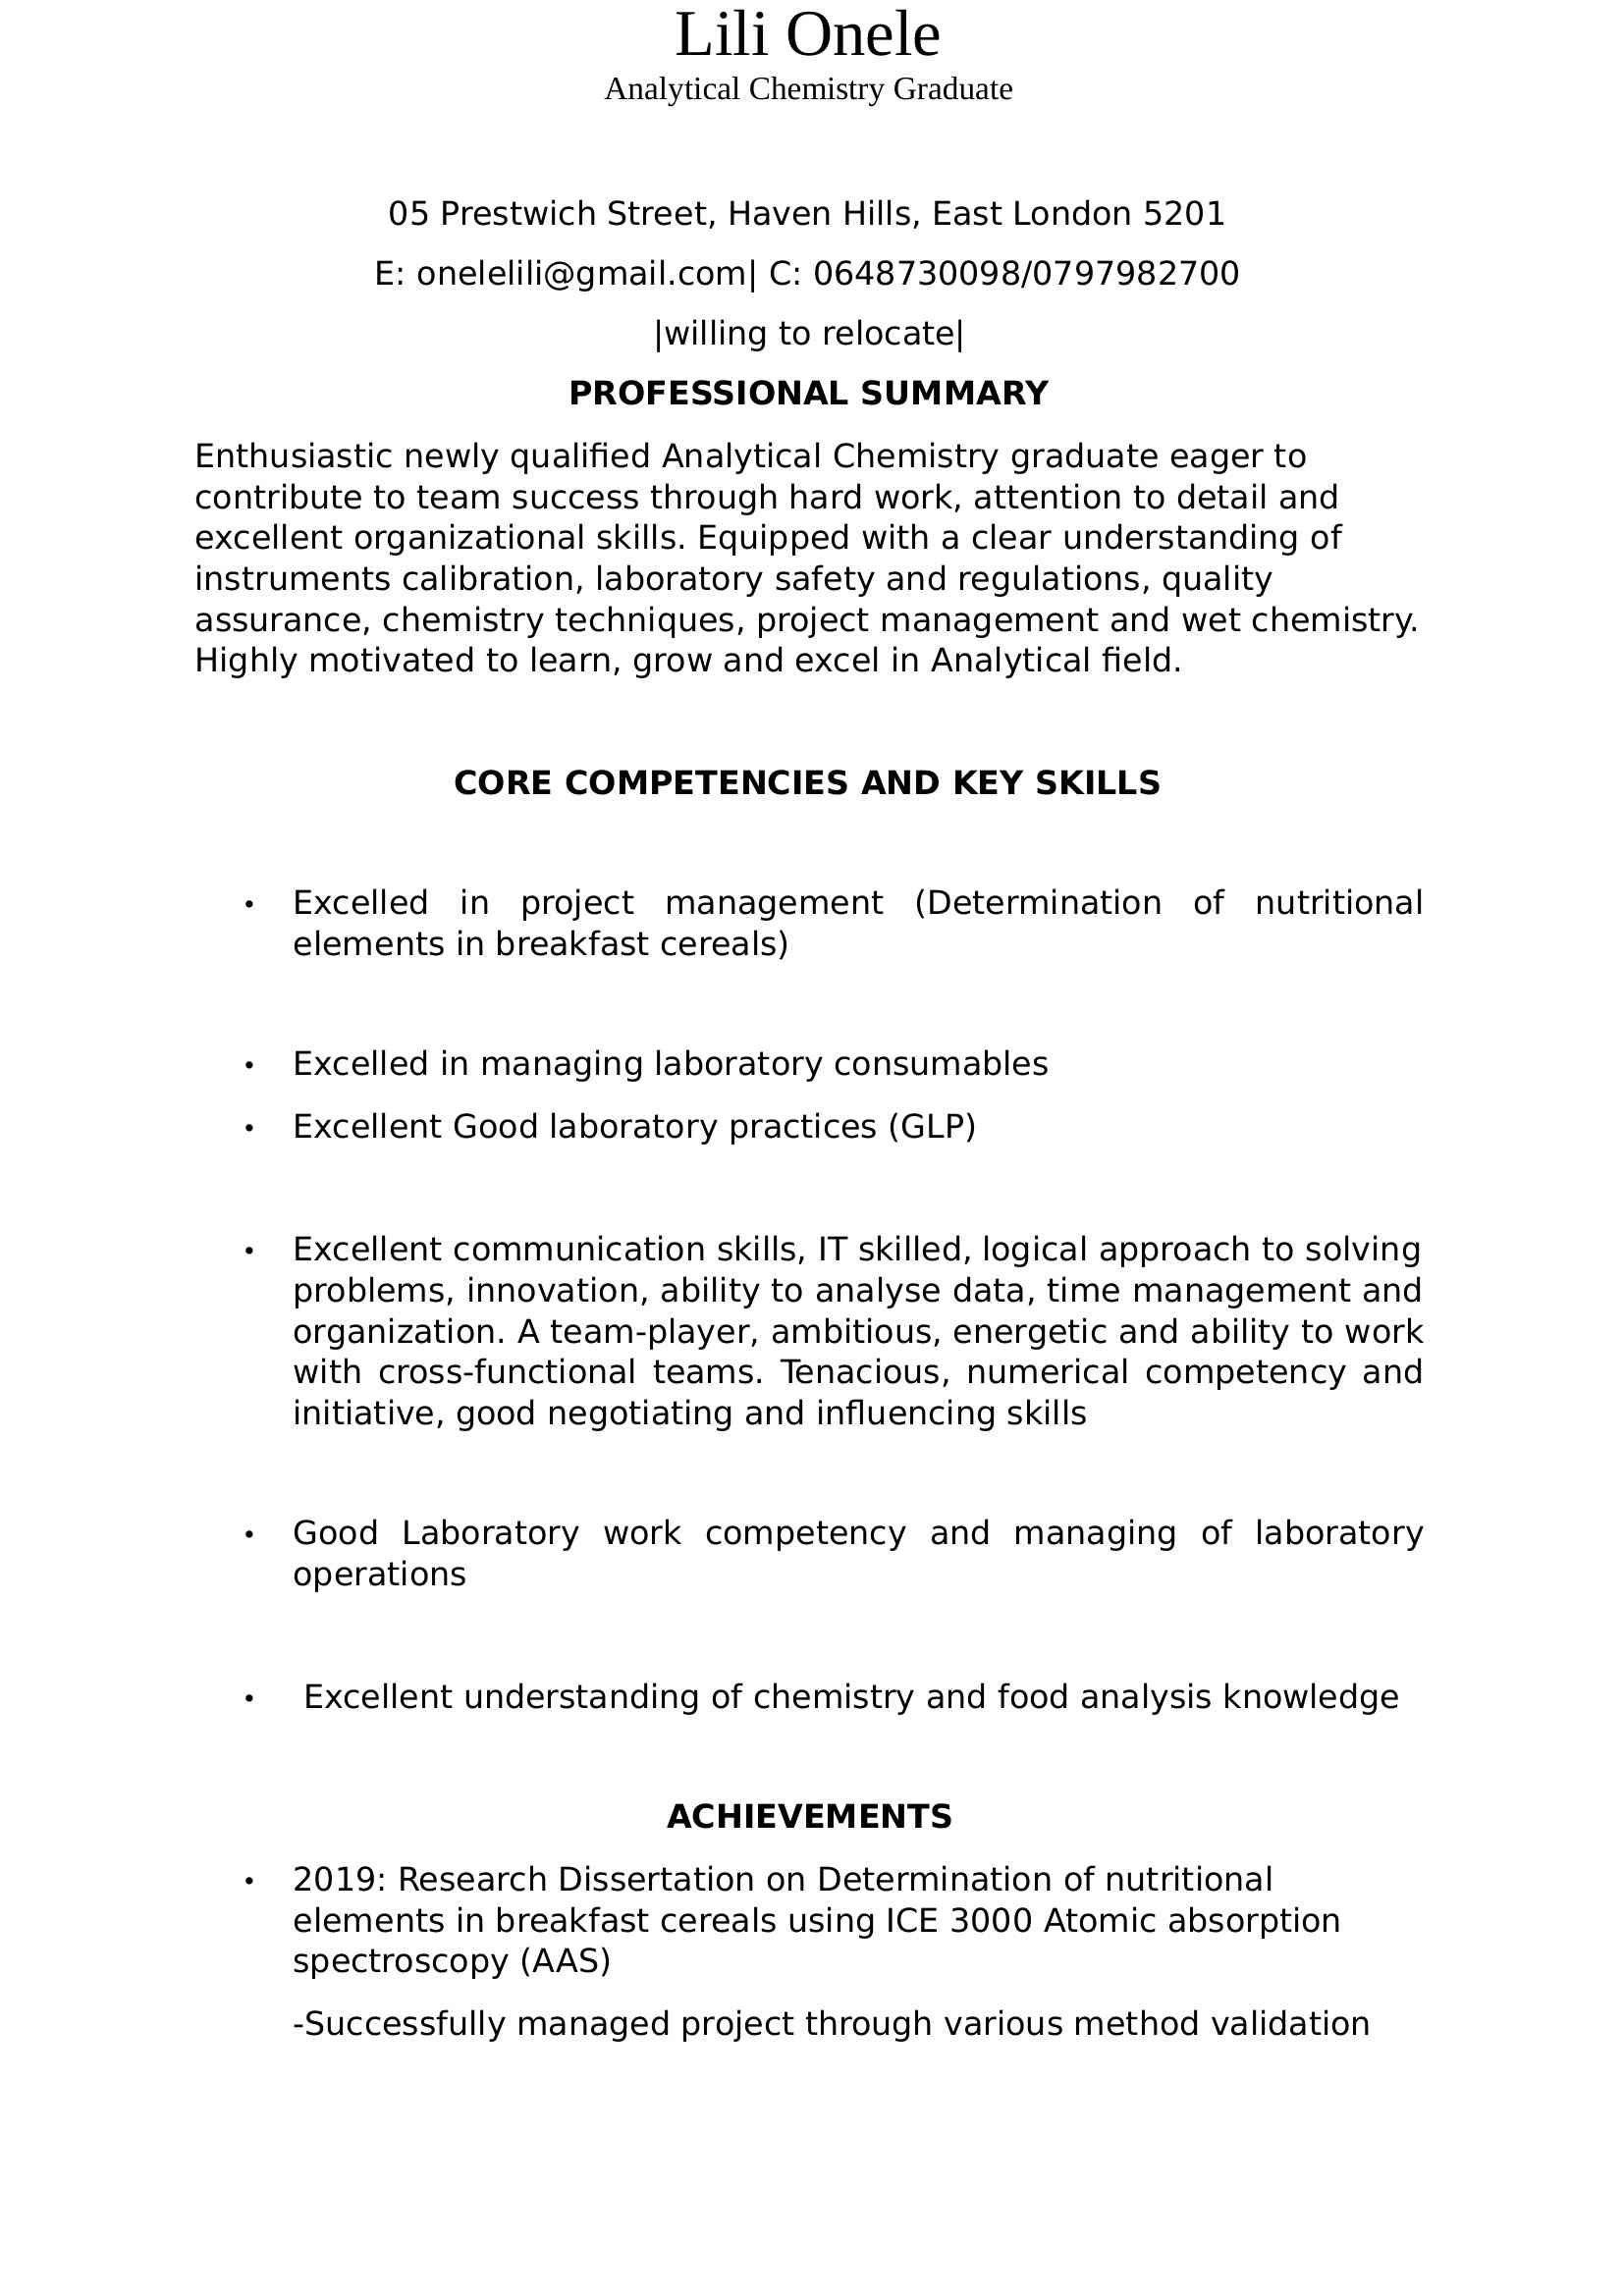 XXXXXX Haven Hills, East London 5201<BR>E: XXXX@XXXX.XXX| C: (XXX) XXX-XXXX/(XXX) XXX-XXXX<BR>|willing to relocate|<BR>PROFESSIONAL SUMMARY<BR>Enthusiastic newly qualified Analytical Chemistry graduate eager to contribute to team success through hard work, attention to detail and excellent organizational skills. Equipped with a clear understanding of instruments calibration, laboratory safety and regulations, quality assurance, chemistry techniques, project management and wet chemistry. Highly motivated to learn, grow and excel in Analytical field.<BR>CORE COMPETENCIES AND KEY SKILLS<BR>  Excelled in project management (Determination of nutritional elements in breakfast cereals)<BR>  Excelled in managing laboratory consumables<BR>  Excellent Good laboratory practices (GLP)<BR>  Excellent communication skills, IT skilled, logical approach to solving problems, innovation, ability to analyse data, time management and organization. A team-player, ambitious, energetic and ability to work with cross-functional teams. Tenacious, numerical competency and initiative, good negotiating and influencing skills<BR>  Good Laboratory work competency and managing of laboratory operations<BR>   Excellent understanding of chemistry and food analysis knowledge<BR>ACHIEVEMENTS<BR>  2019: Research Dissertation on Determination of nutritional elements in breakfast cereals using ICE 3000 Atomic absorption spectroscopy (AAS)<BR>-Successfully managed project through various method validation<BR>-Excelled in producing new testing techniques and product improvement<BR>-Excelled in individual calibration of instruments which led to acquiring a set of effective interpersonal skills, troubleshooting and integration<BR>-Equipped computational and data-processing skills, relating to chemical information and data                   <BR>PROFESSIONAL EXPERIENCE<BR>Chemical Laboratory Assistant<BR>UNIVERSITY OF FORT HARE, Alice, Eastern Cape<BR>August 2018- January 2019<BR>DUTIES:<BR>  Great attention to auxiliary work such as record-keeping pertaining to samples, environment monitoring and lab equipment<BR>  Excellent knowledge about standard operating procedures (SOPs)<BR>  Developed exceptional organizational skills, accuracy of results and excellent work ethic<BR>  Assisted undergraduates and postgraduates to understand product requirements and recommended methods to address improvement opportunities<BR>  Assisted other Laboratory Assistants about new methods development to save costs by avoiding duplicative testing <BR>  Successfully demonstrated an ability to learn quickly, master complex concepts flawlessly, effectively solve problems while producing quality results<BR>  Effectively educated students regarding correct use of laboratory equipment<BR>  Effectively managed and archived quality documentation<BR>  Excelled in using analytical chemistry techniques to conduct experiments and safely handled chemical reagents<BR>  Excelled in dispensing solutions and chemical materials.<BR>  Excellent vast knowledge about sterilization methods in the laboratory.<BR>EDUCATIONAL BACKROUND<BR>Walter Sisulu University- 2020  <BR>BTech (Analytical Chemistry)                            <BR>Walter Sisulu University- 2019   <BR>National Diploma (Analytical Chemistry)                                    Lili Onele<BR>Analytical Chemistry Graduate